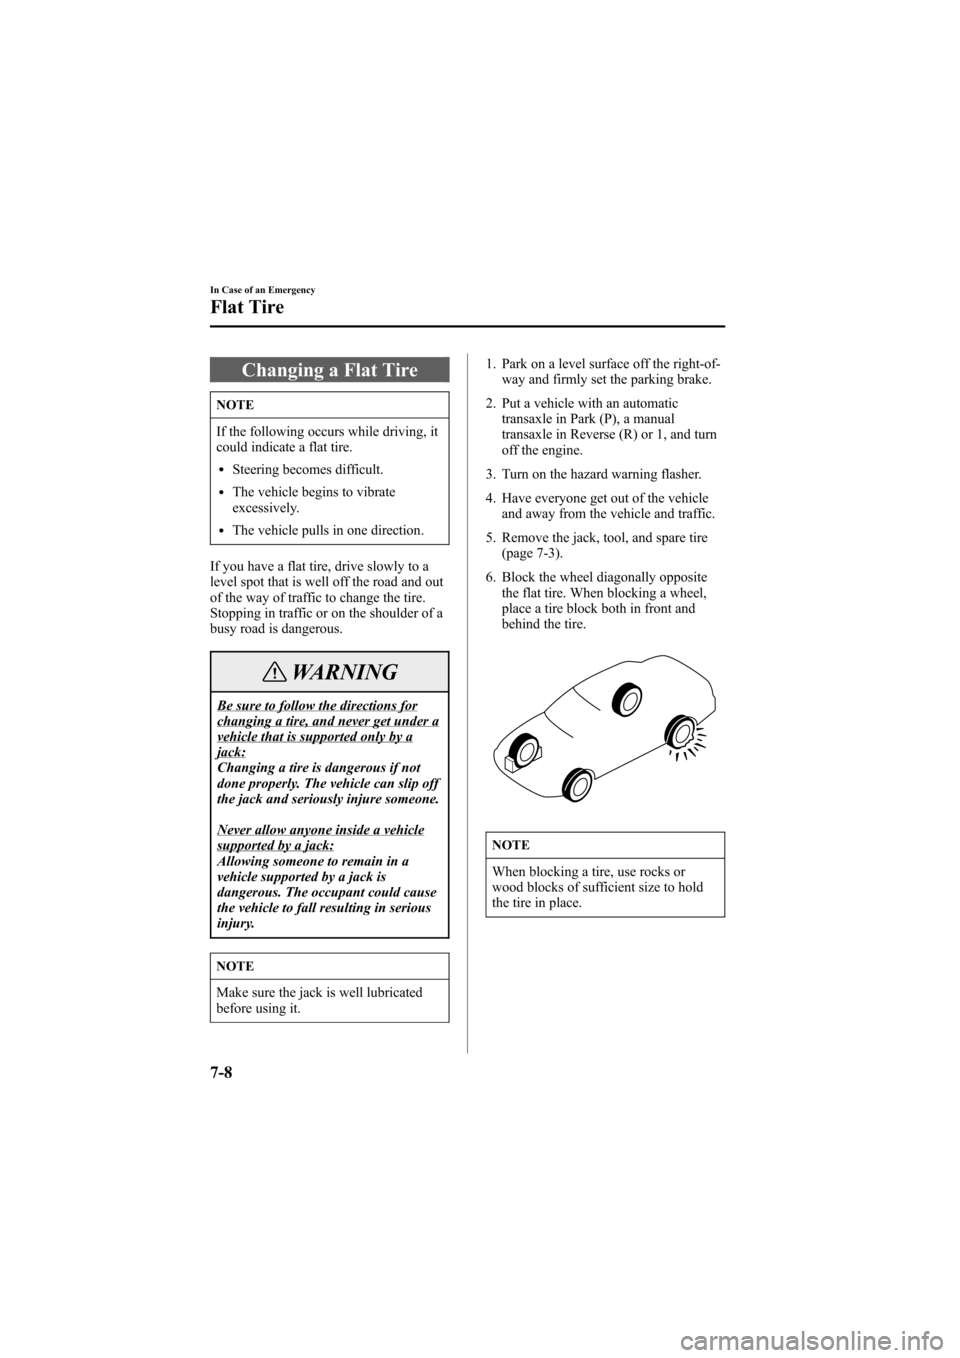 MAZDA MODEL 6 2007  Owners Manual (in English) Black plate (250,1)
Changing a Flat Tire
NOTE
If the following occurs while driving, it
could indicate a flat tire.
lSteering becomes difficult.
lThe vehicle begins to vibrate
excessively.
lThe vehicl